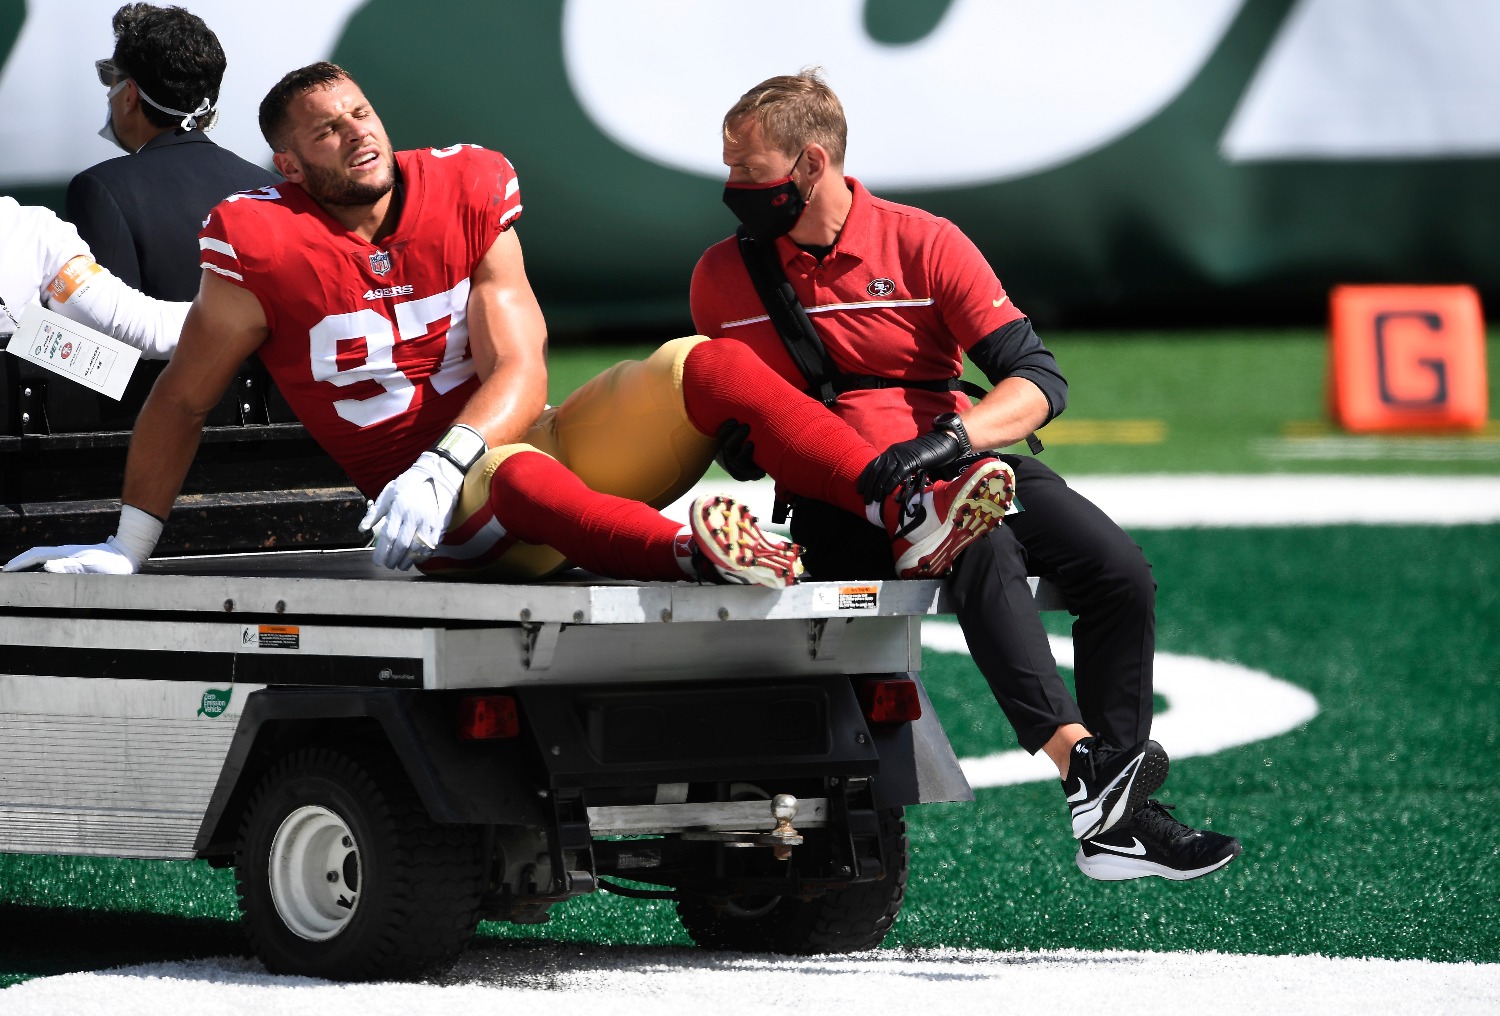 The 49ers suffered a devastating blow to their Super Bowl chances with Nick Bosa sustaining a torn ACL that ends his season.